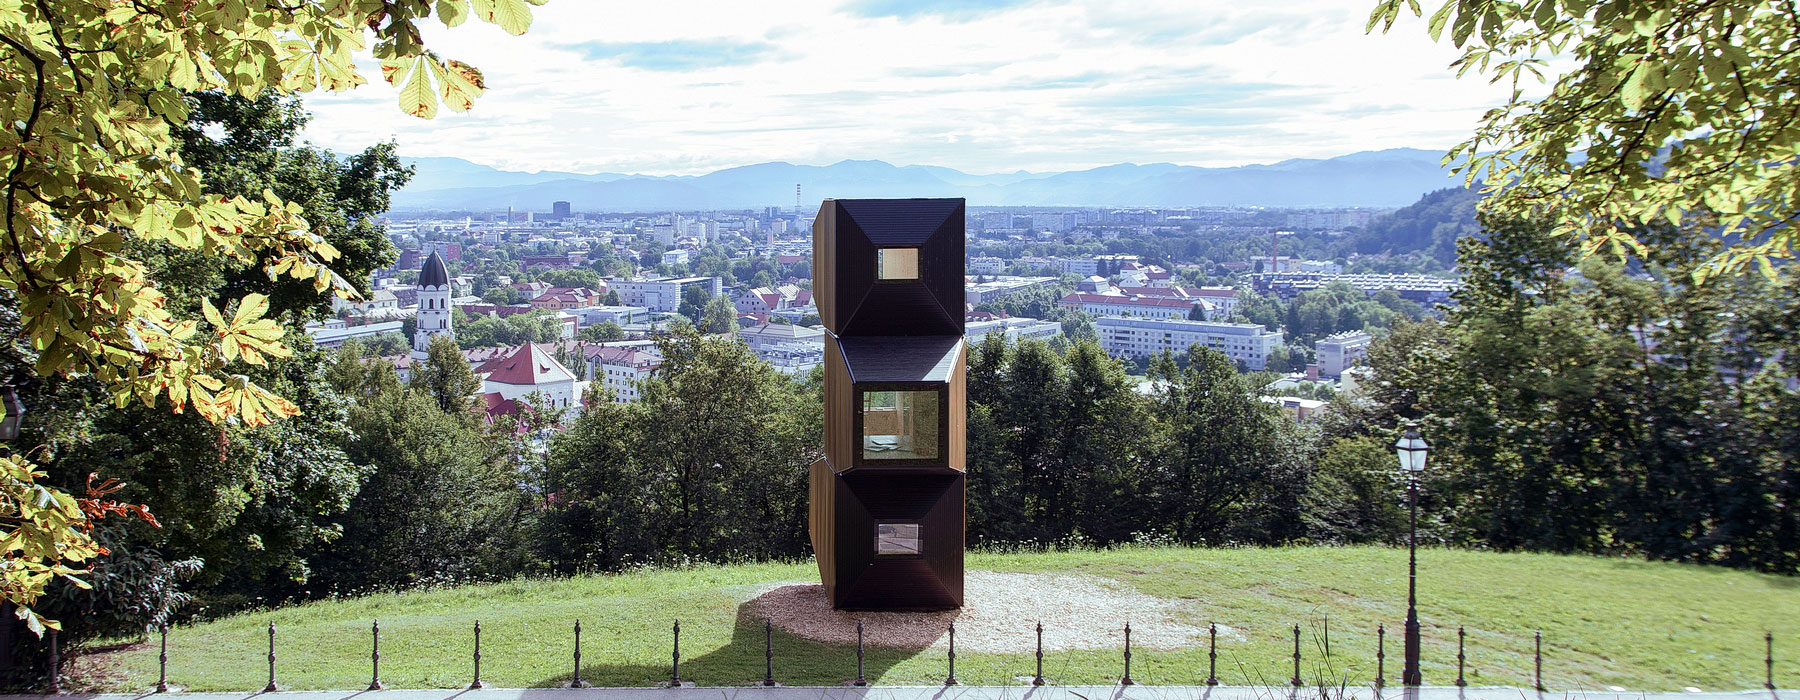 OFIS architects' compact living unit is adaptable to various climate conditions and terrains